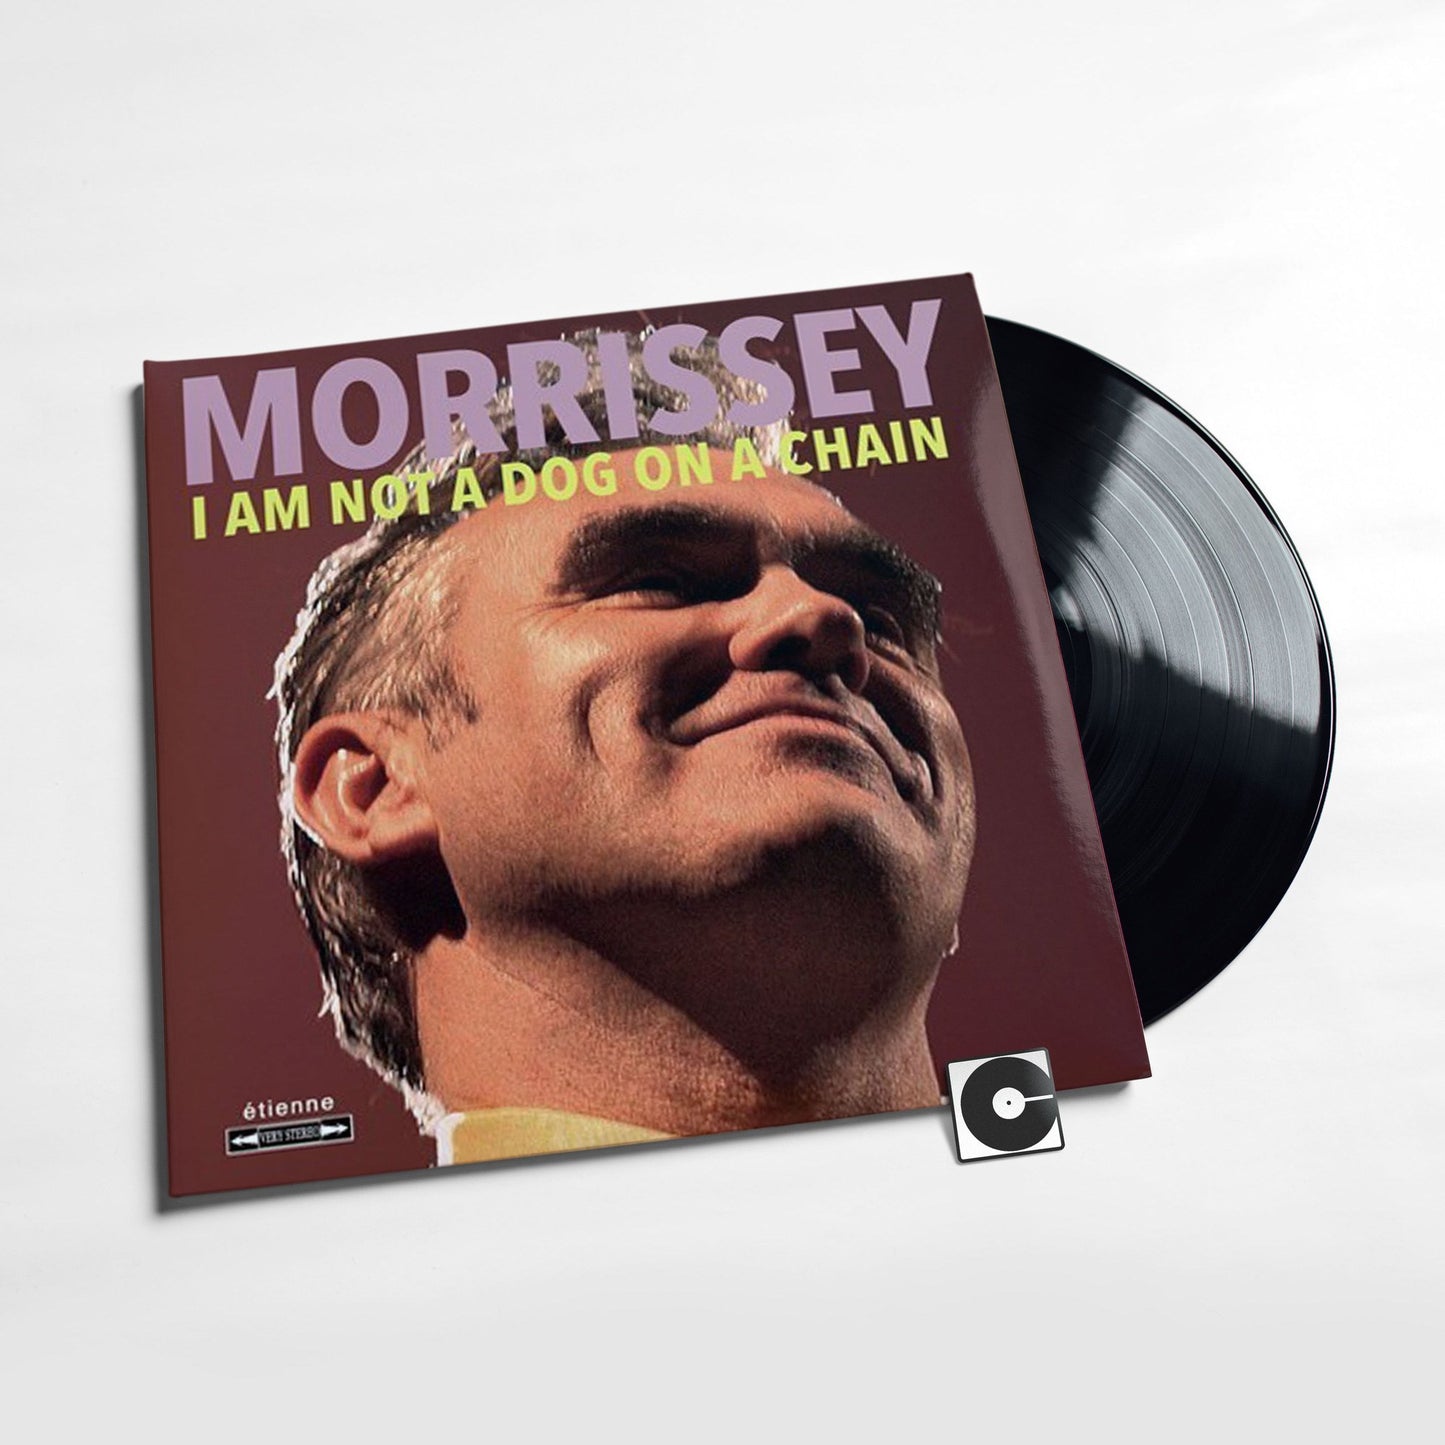 Morrissey - "I Am Not A Dog On A Chain"